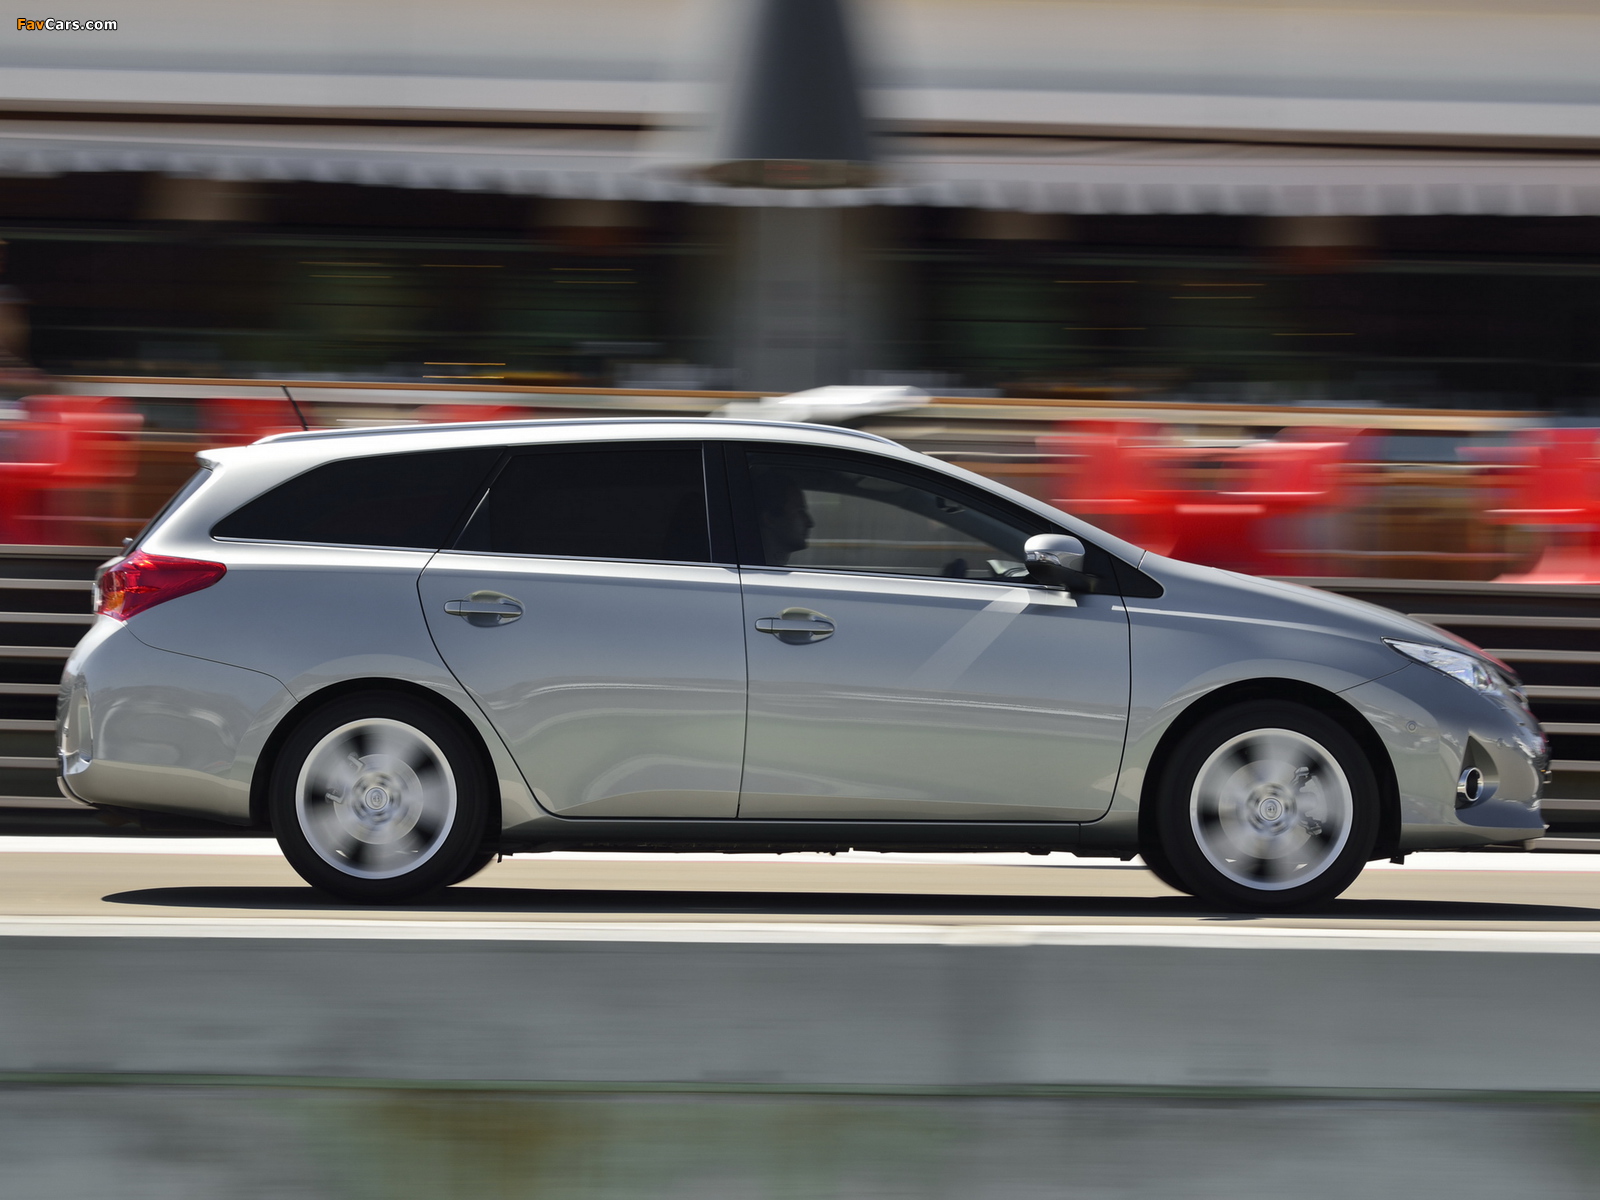 Toyota Auris Touring Sports 2013 images (1600 x 1200)